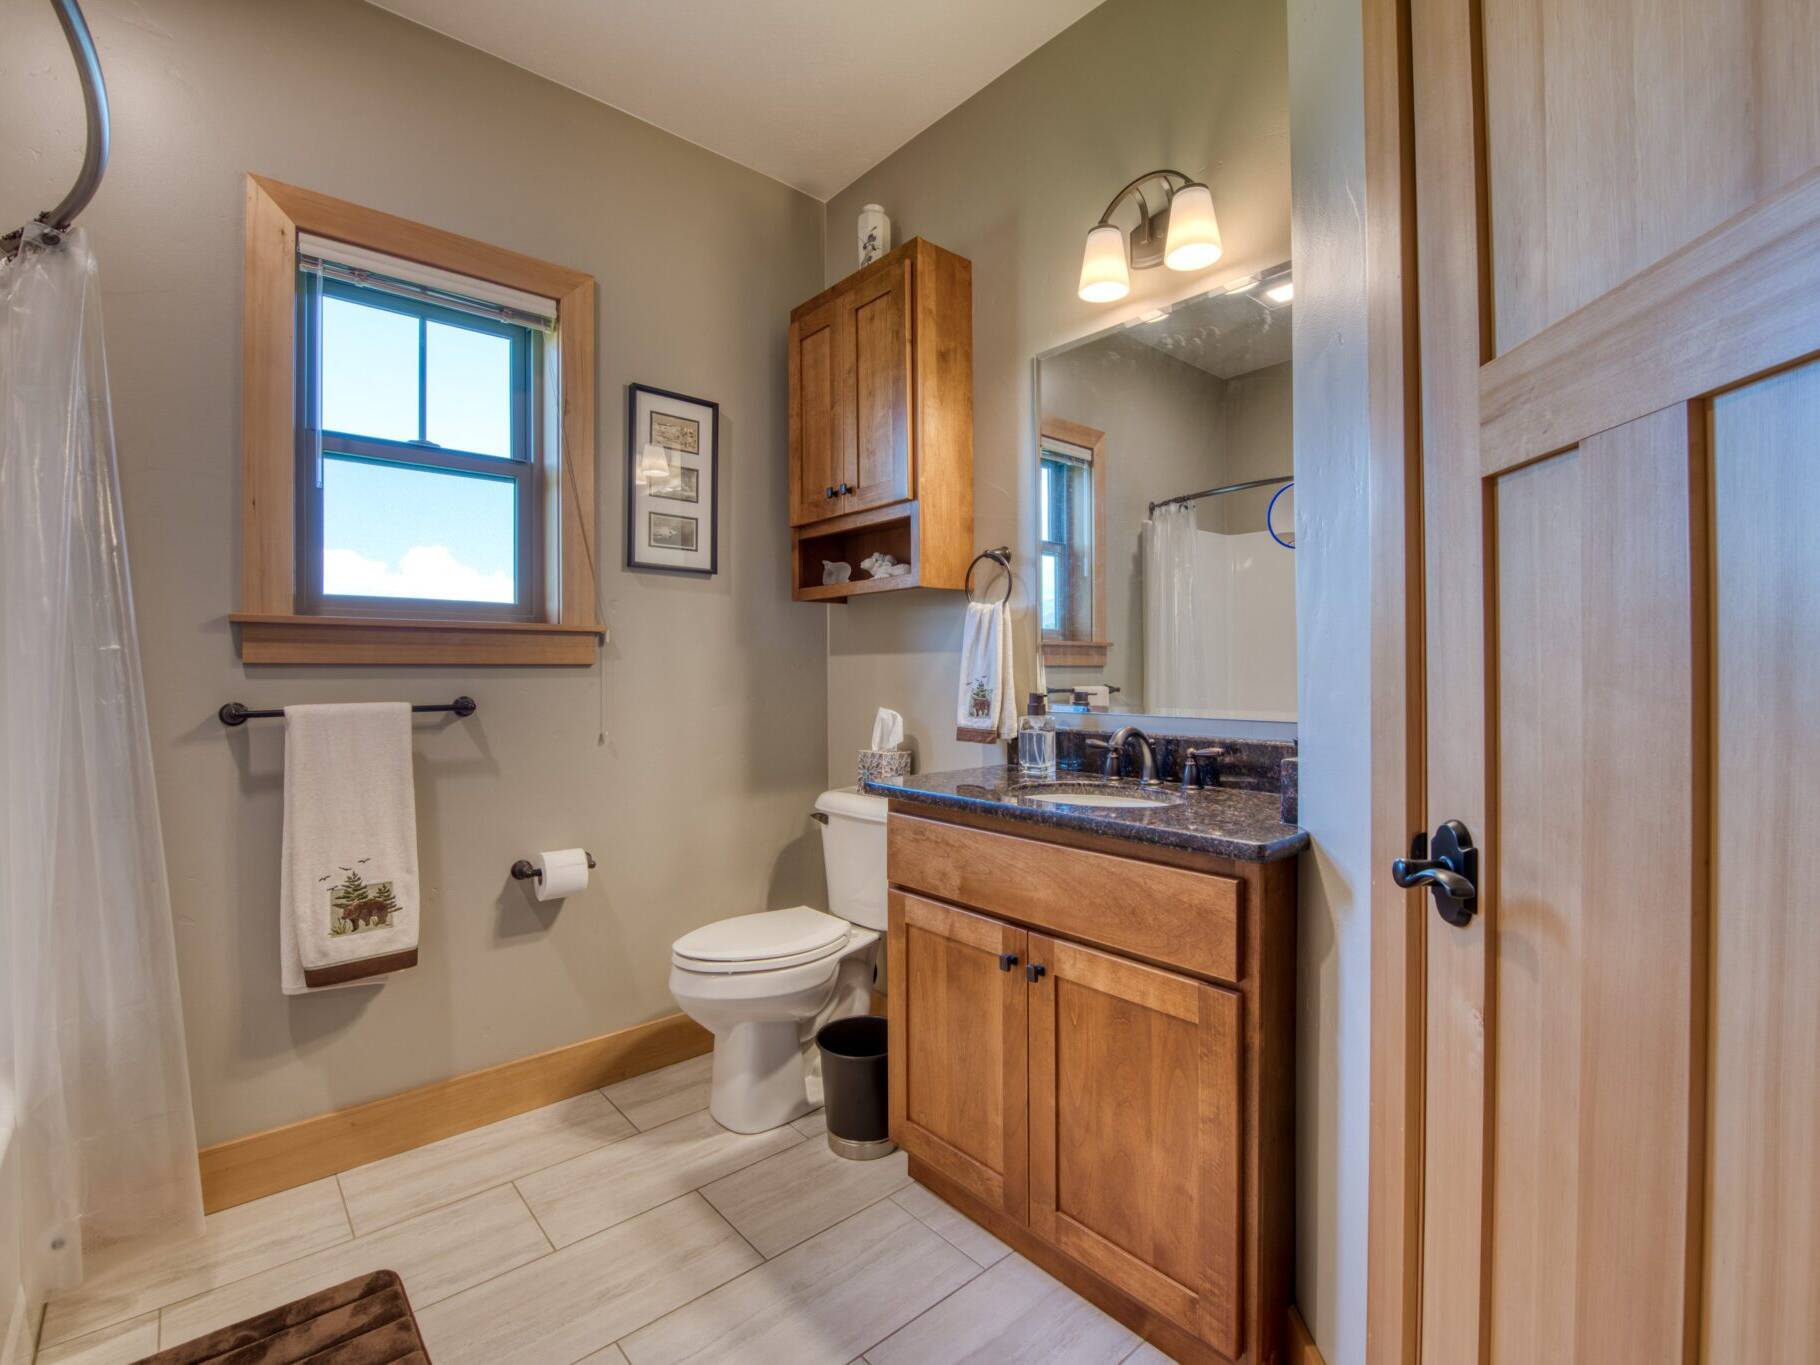 Guest bathroom with tile floor, granite countertops, and wood trim in a custom home in Hamilton, MT.